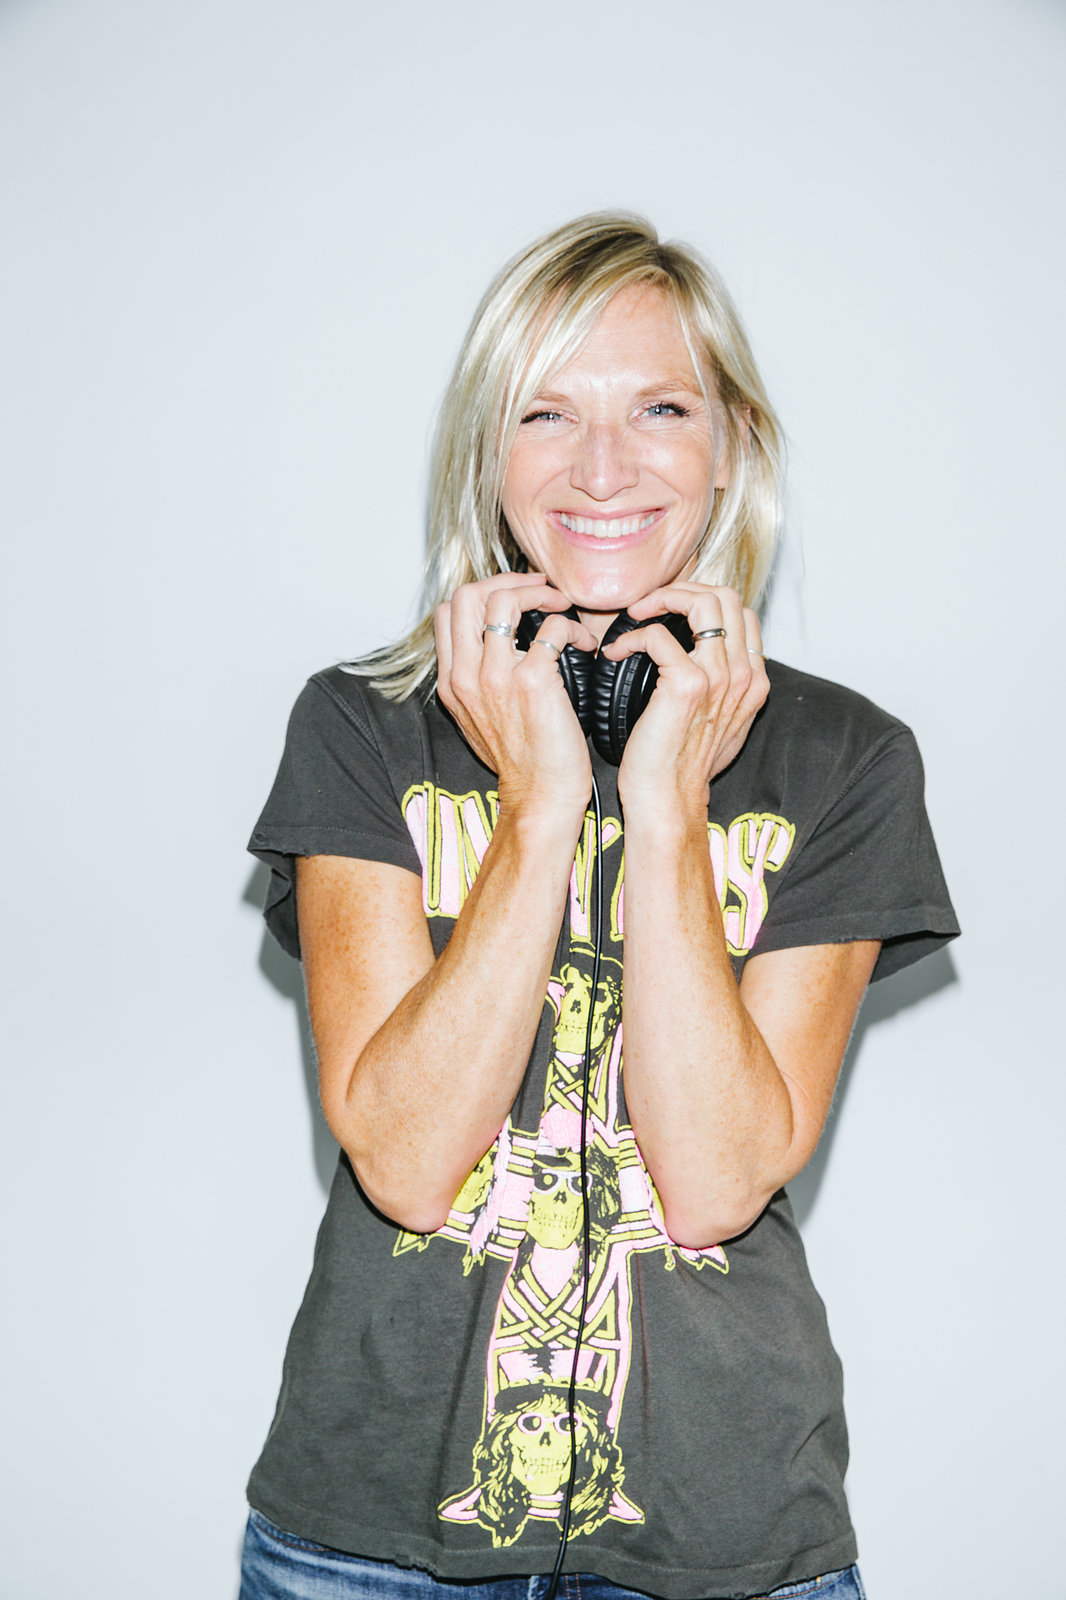 Derek Bremner Photography | Gallery | Jo Whiley - Sept 18 | Jo Whiley